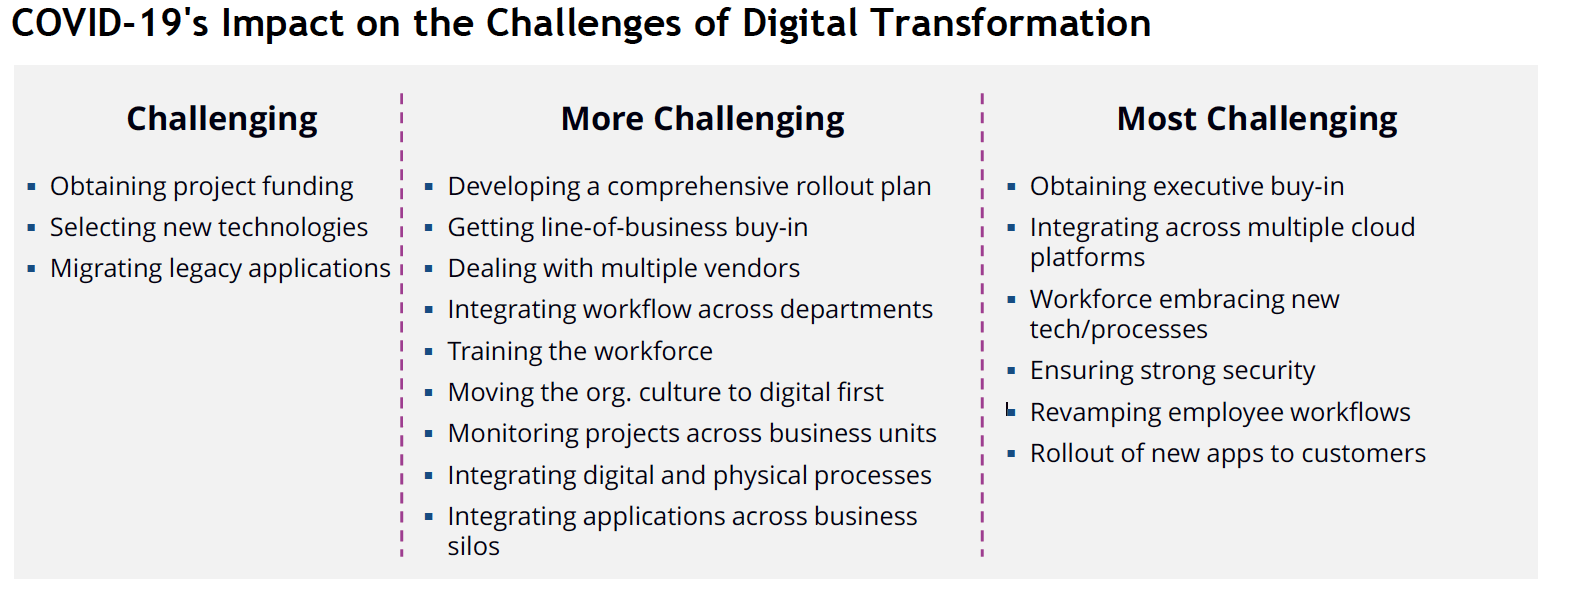 List of COVID 19's impact on the challenges of digital transformation from the IDC white paper, The Impact of Digital Transformation in Times of Change.